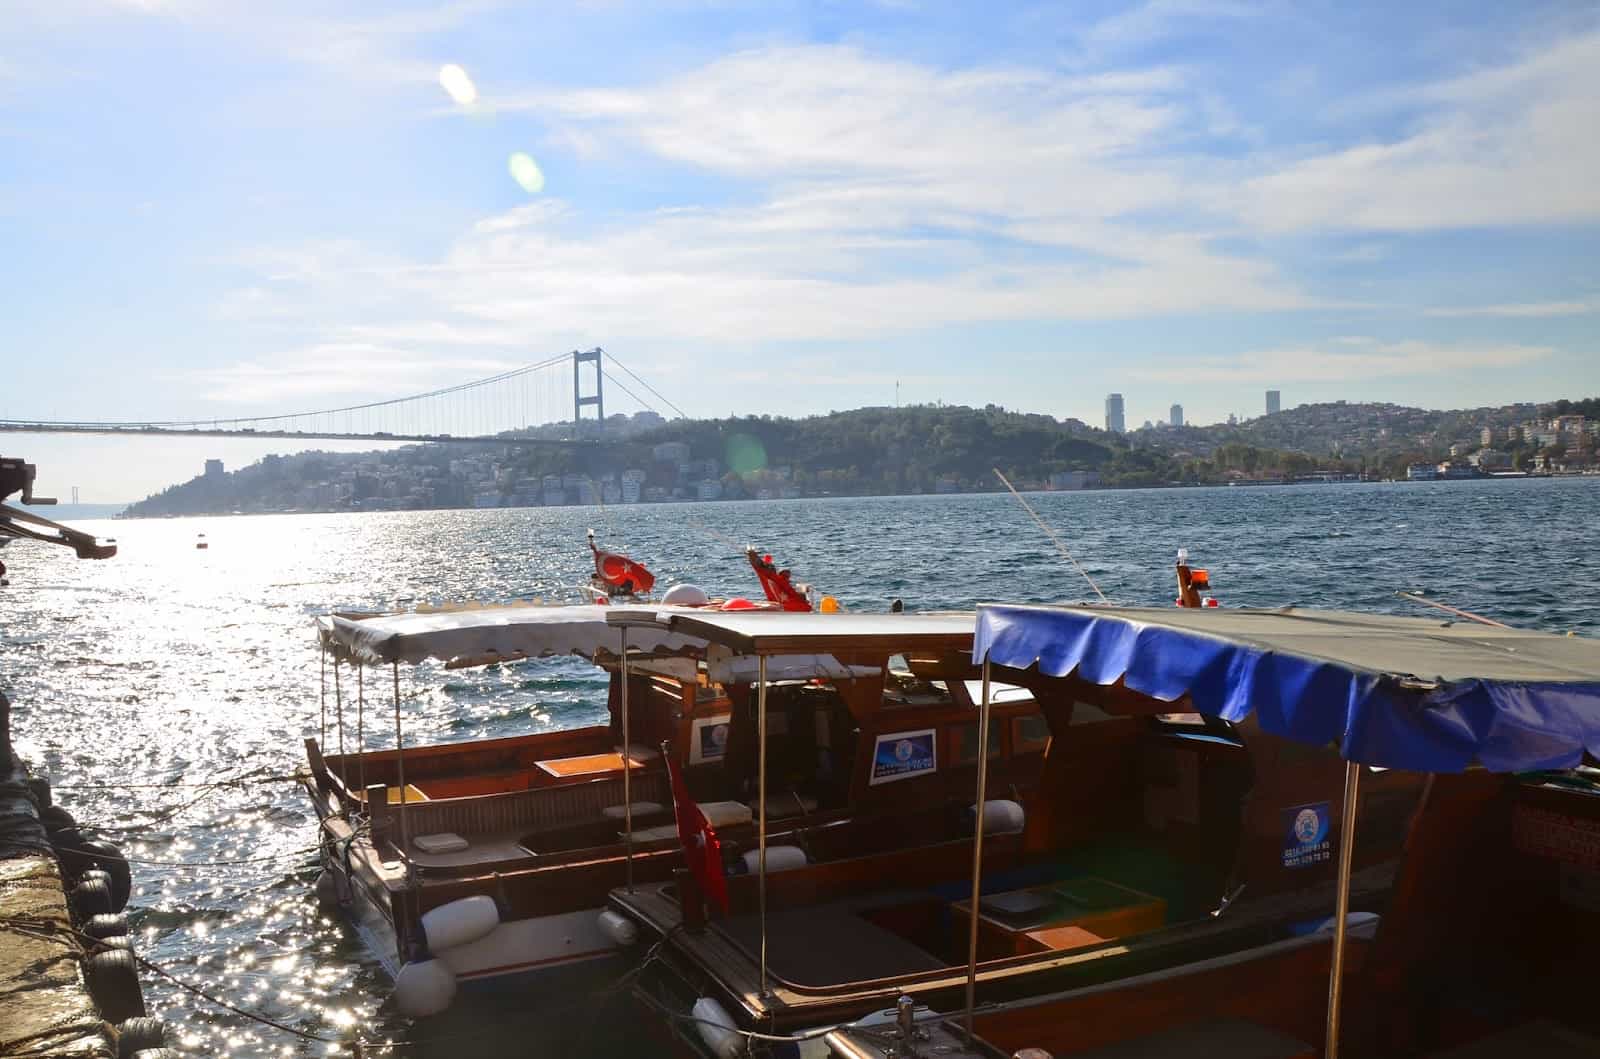 Looking out onto the Bosporus from Kanlıca, Istanbul, Turkey